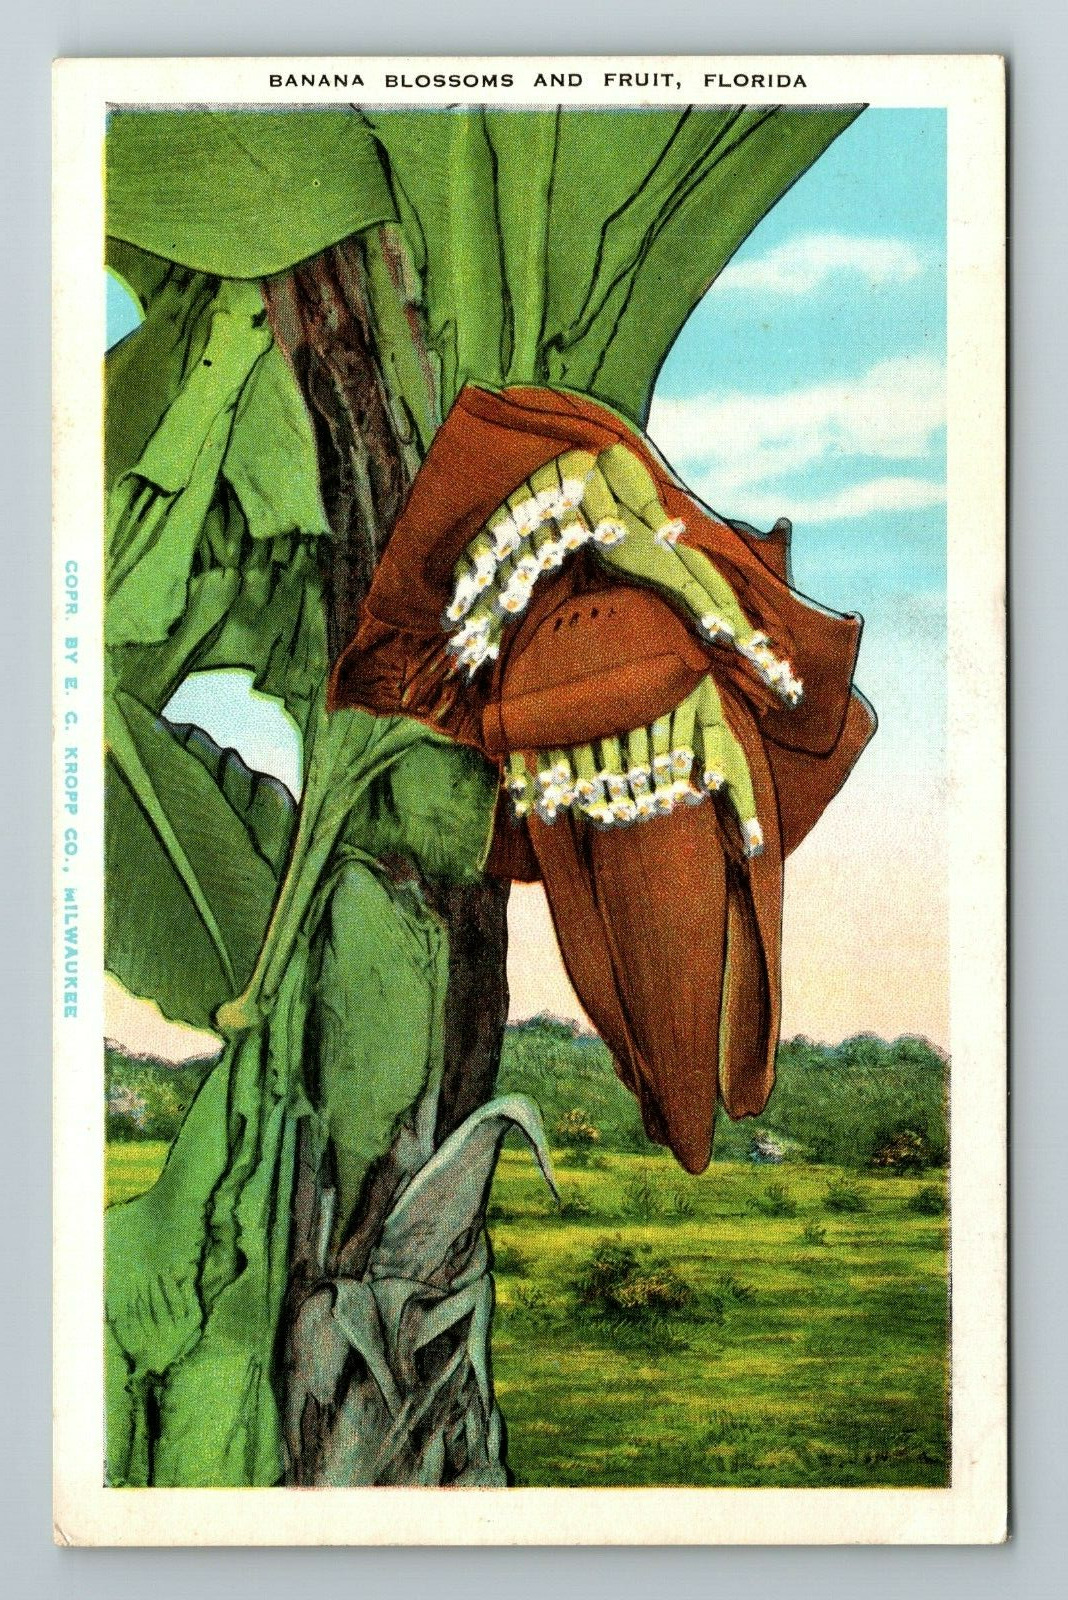 FL-Florida, Banana Blossoms And Fruit, Scenic Nature View, Vintage Postcard